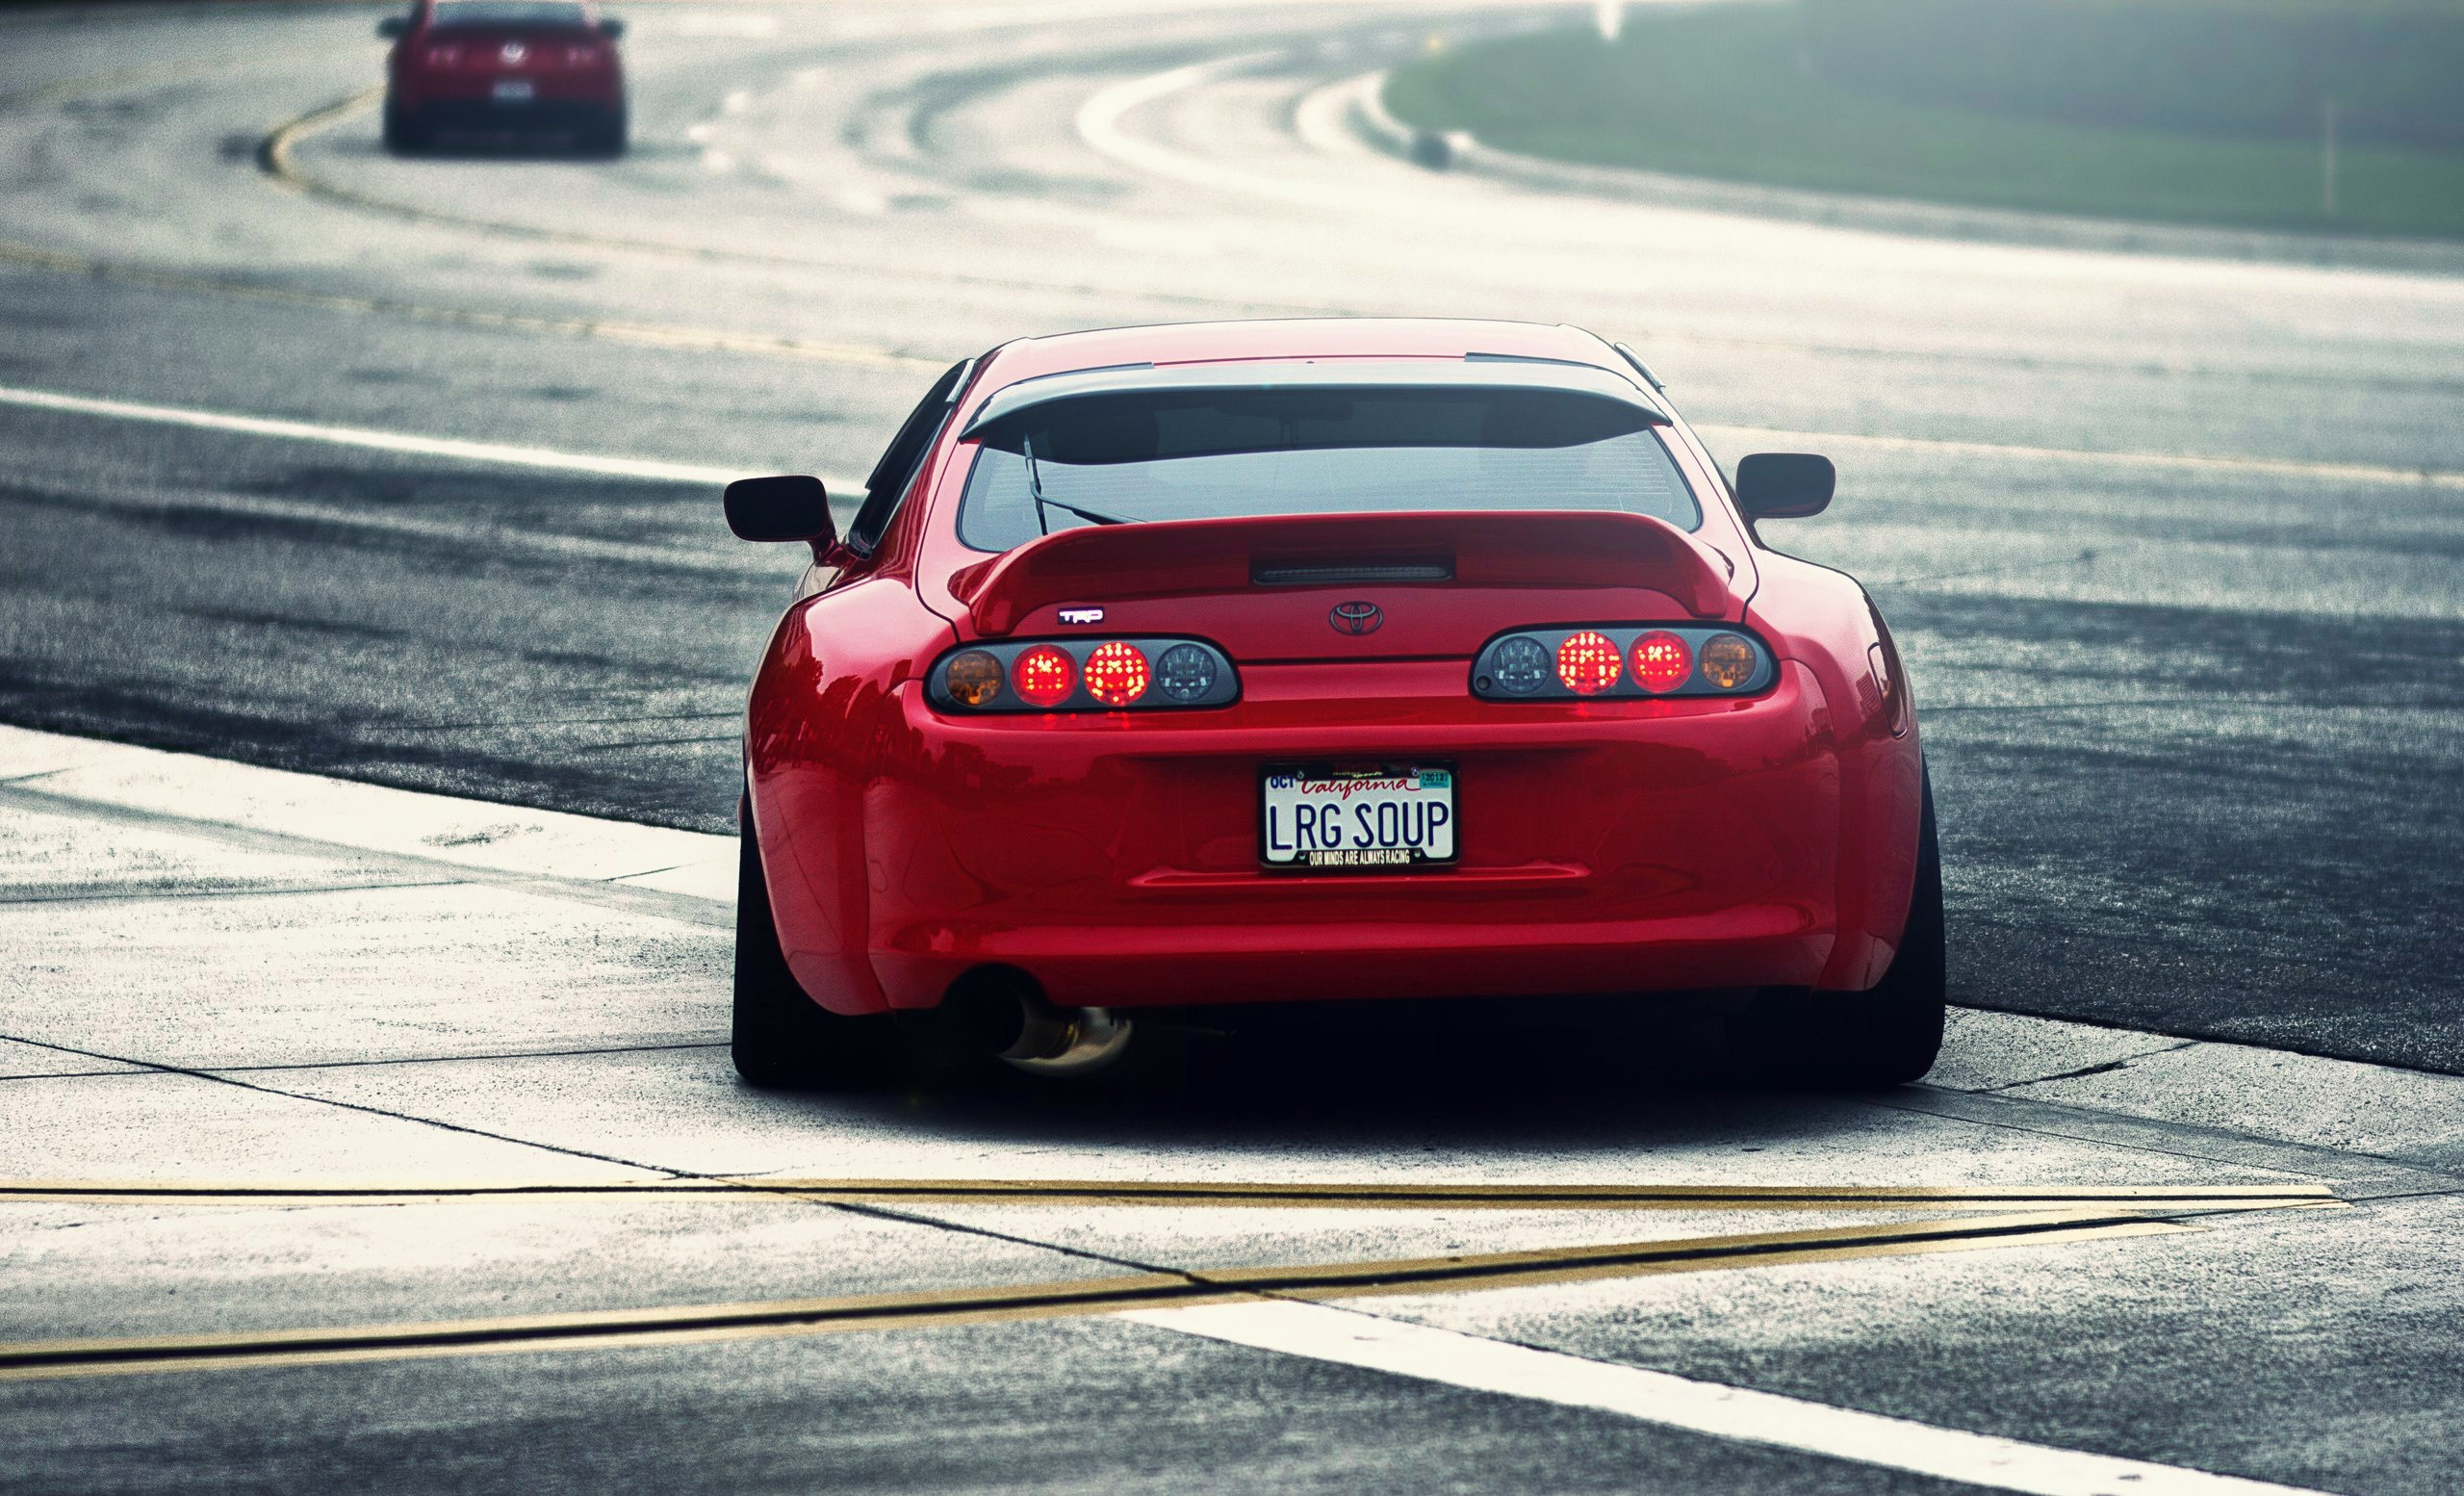 General 2560x1554 car Toyota Supra road Toyota vehicle red cars Japanese cars